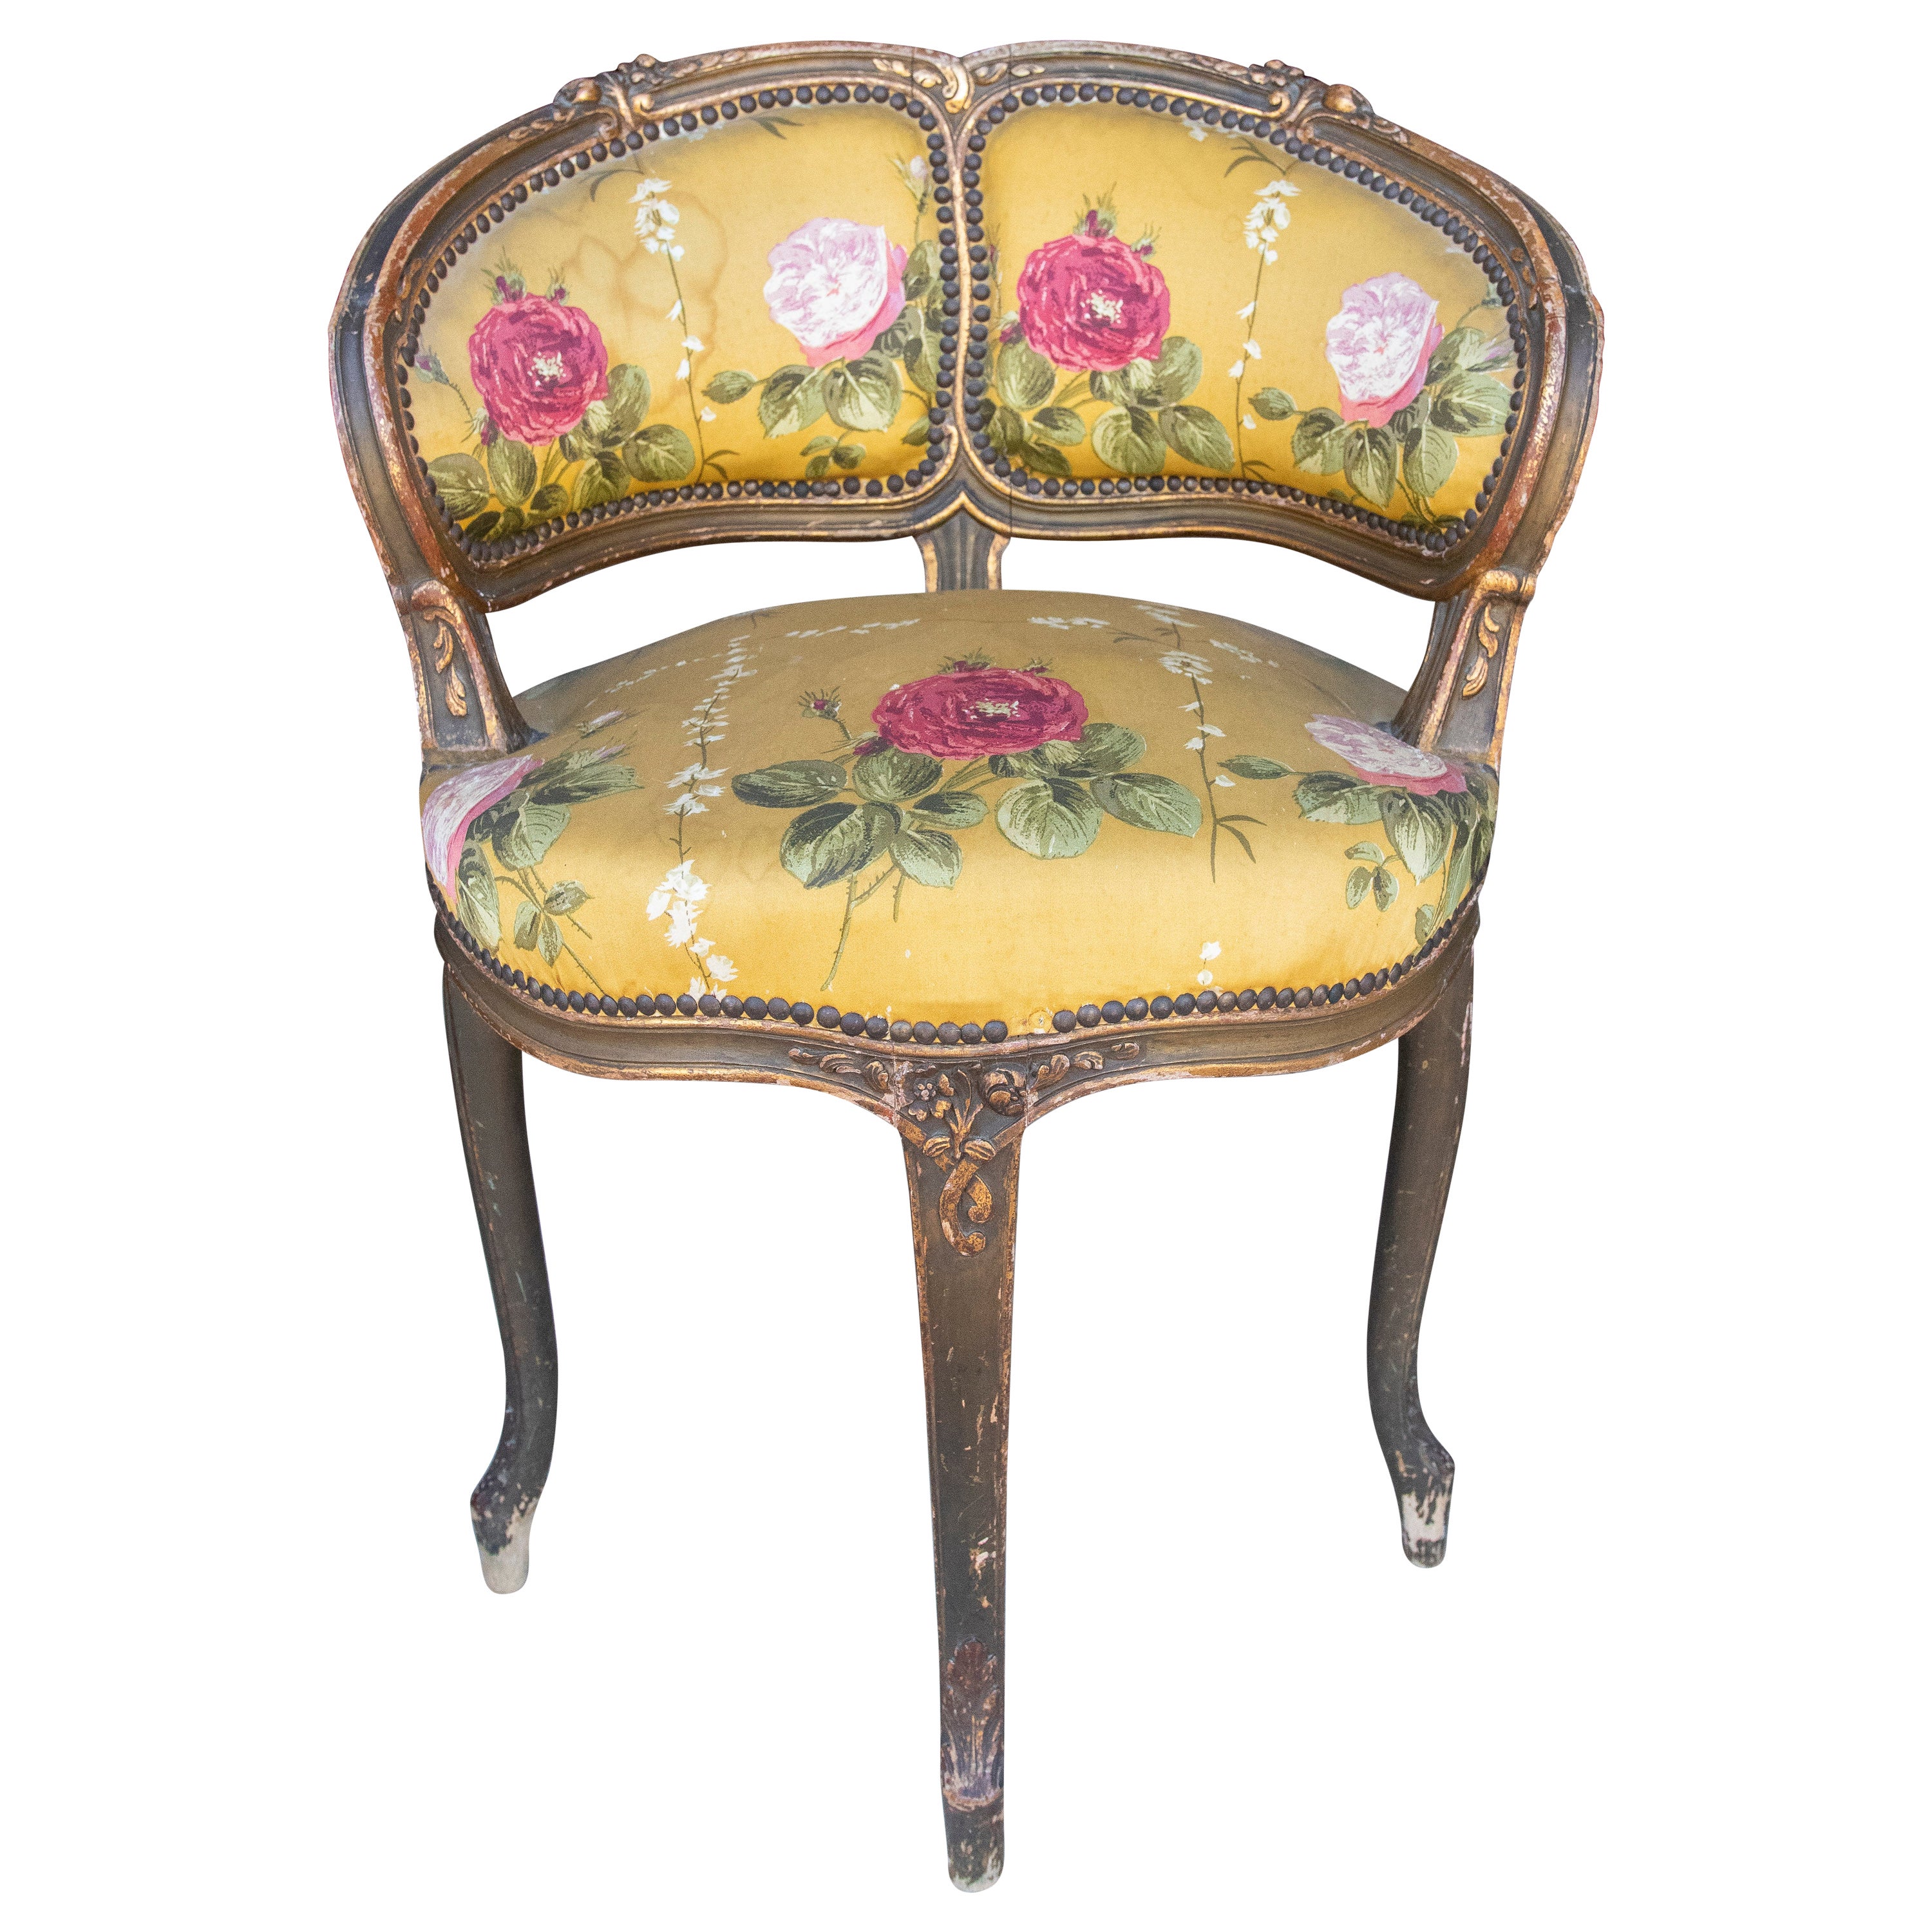 19th Century French Upholstered Wooden Corner Chair